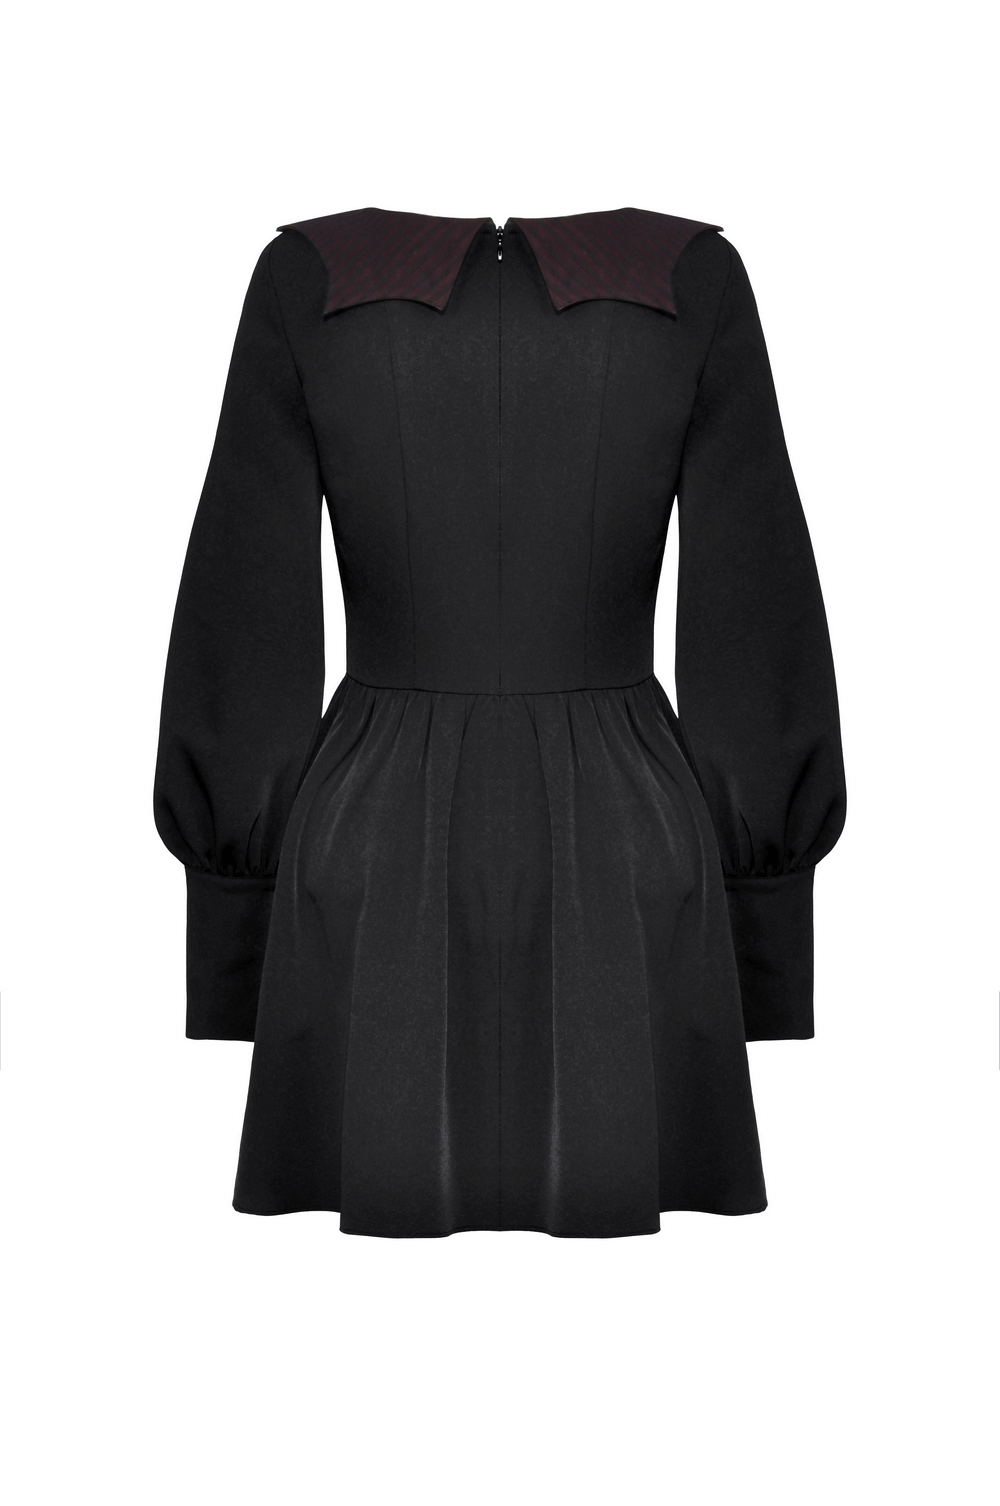 Elegant Gothic Black Dress with Skull and Bow Detail